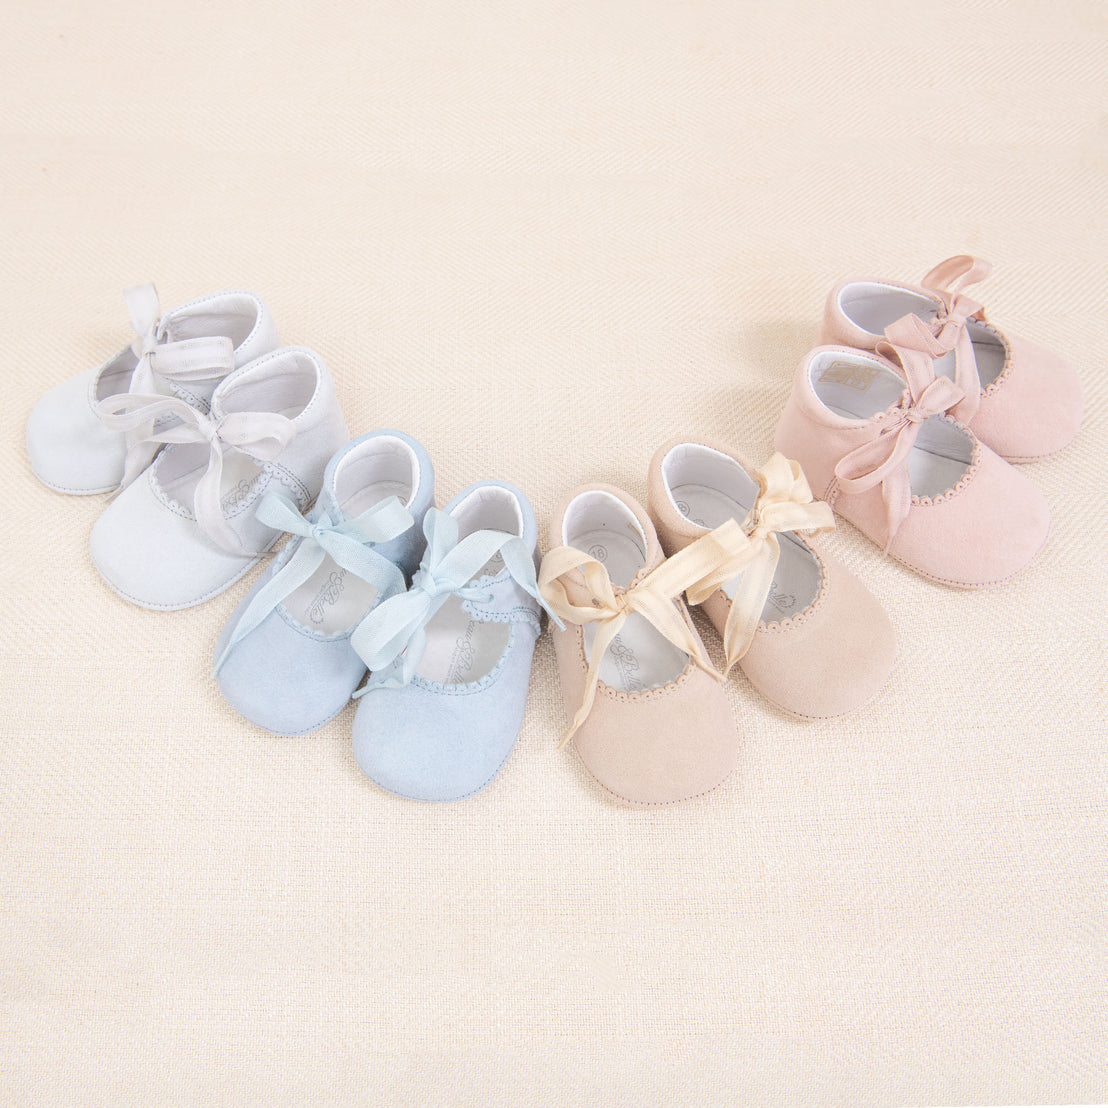 Four pairs of Girls Suede Tie Mary Janes—two pink and two blue—arranged on a beige fabric background, each tied with matching ribbon laces.